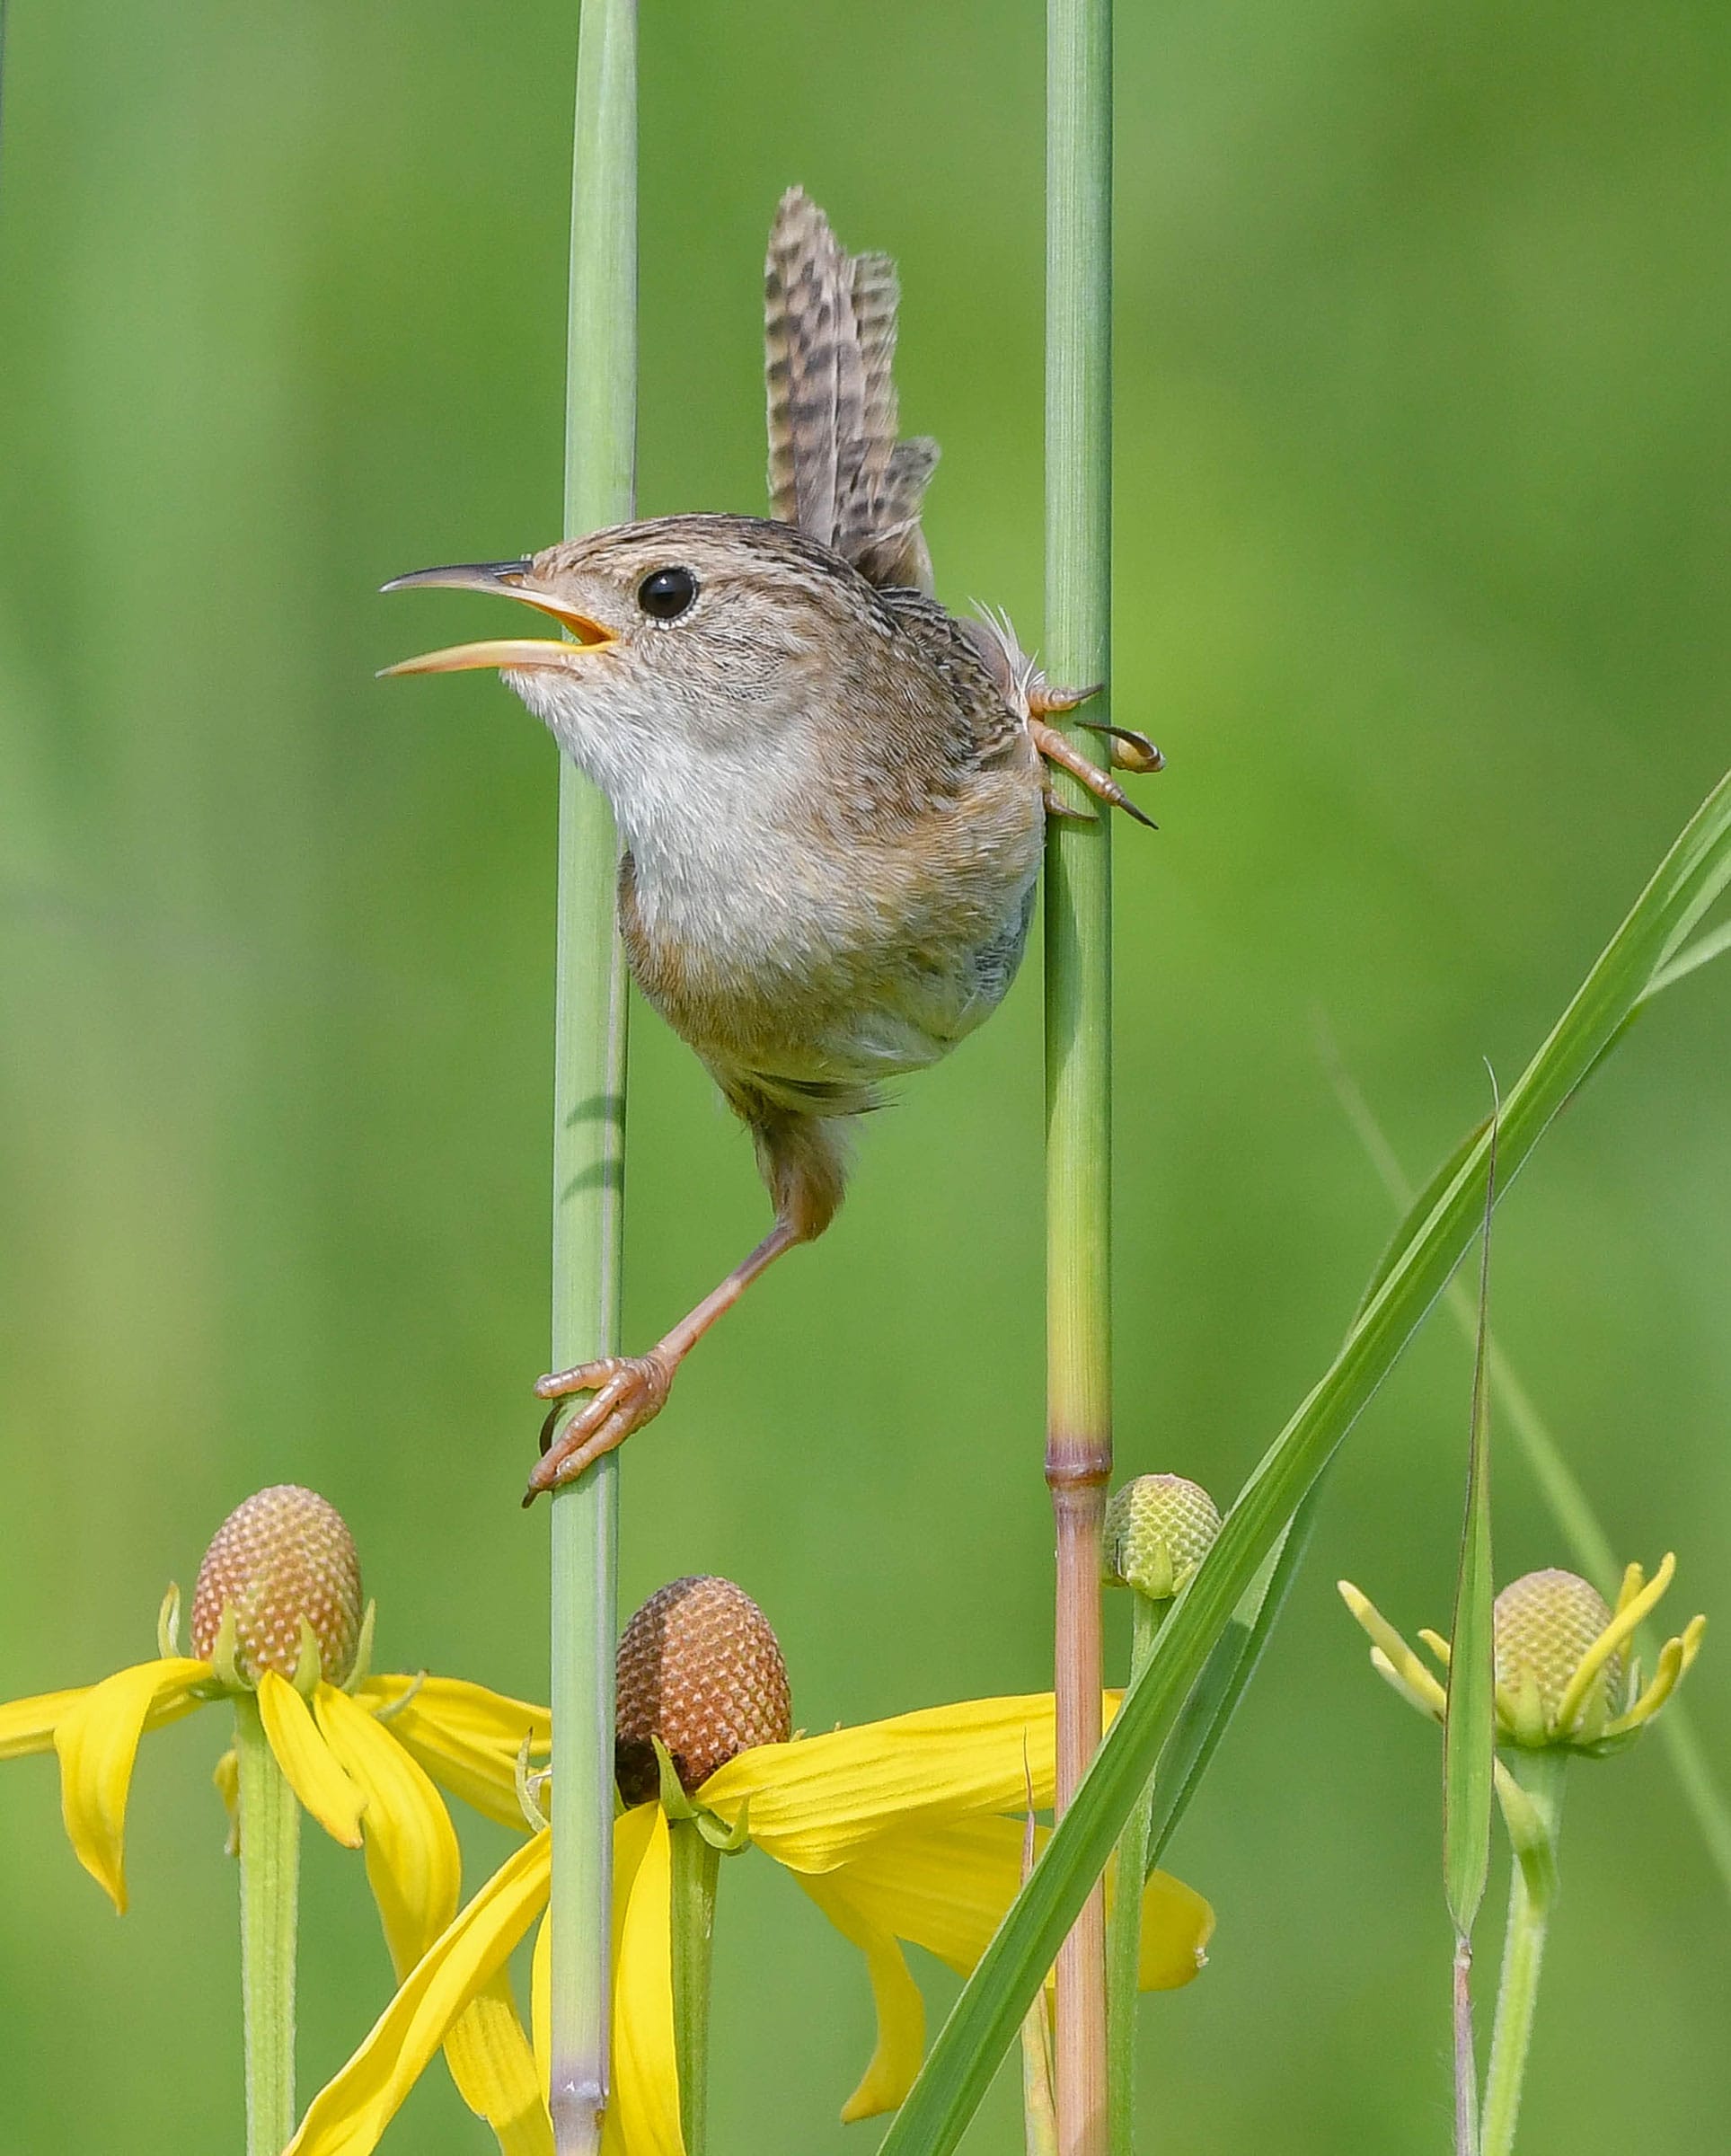 A tiny russet brown Sedge Wren grasps two long, parallel stems as if they were stilts. The bird’s head looks to the left of the frame. Green grasses surround the bird, and yellow flowers are at the bottom of the image.